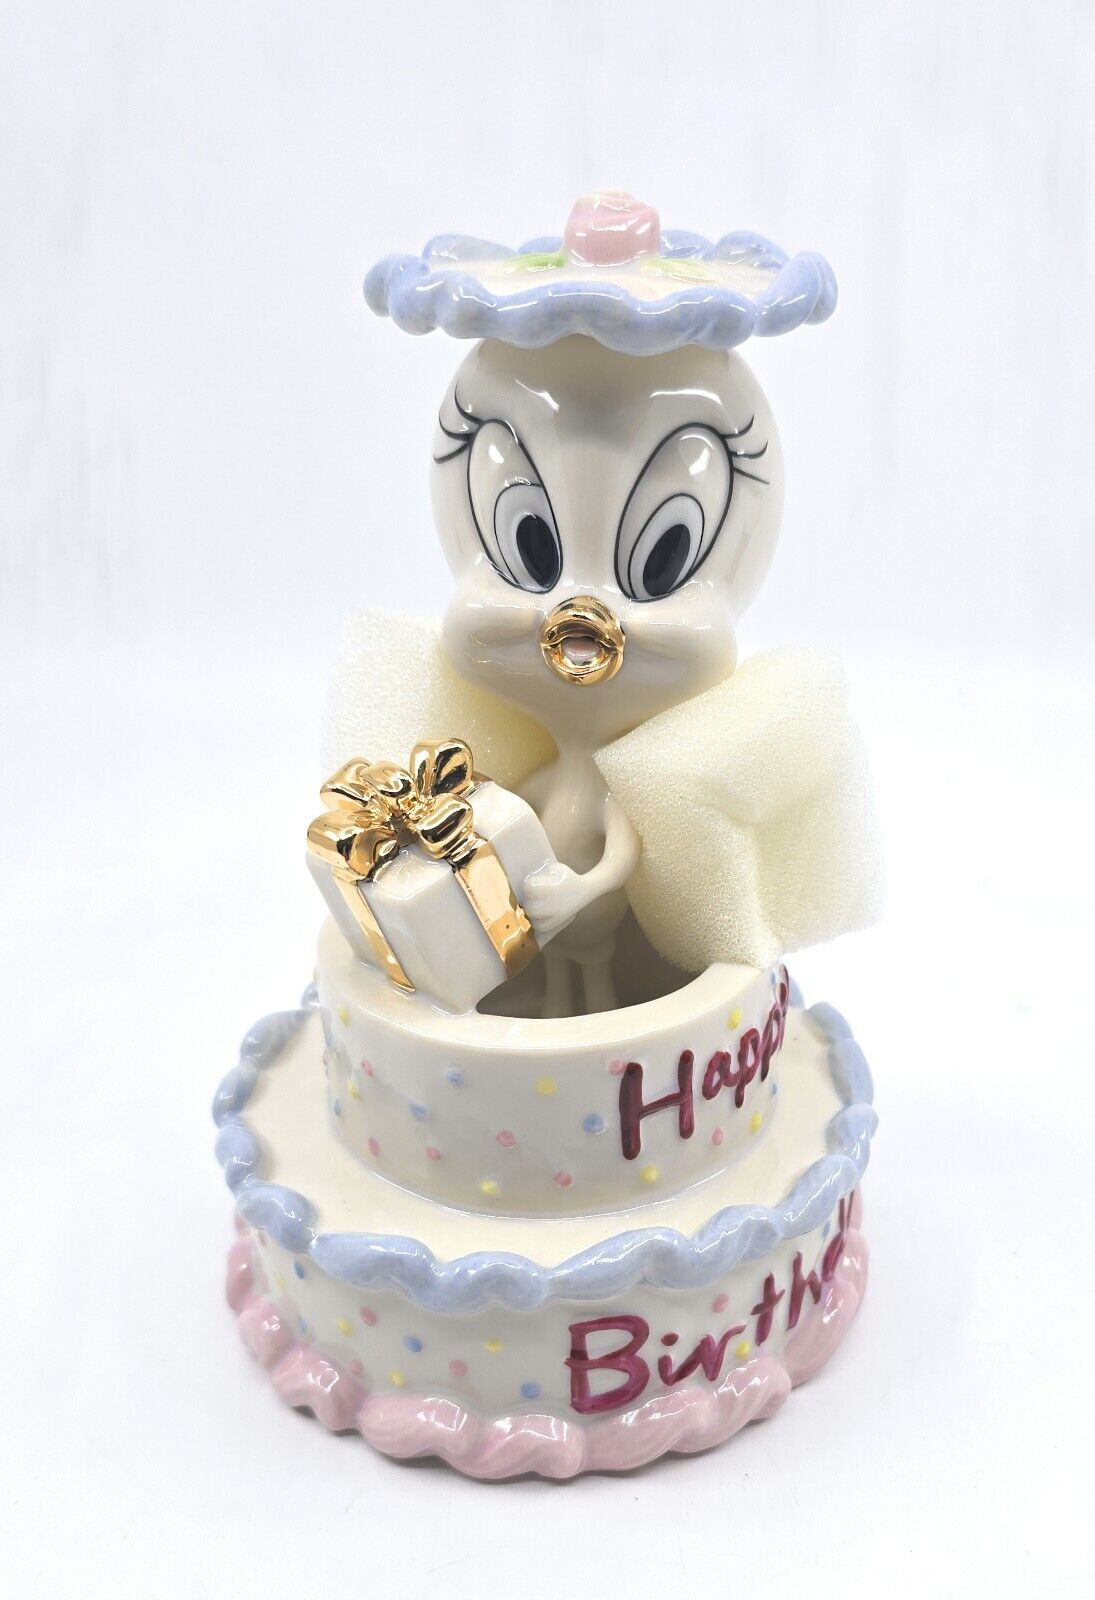 NWB Lenox Tweety Birthday 6-Inch Figure with Certificate and Signature